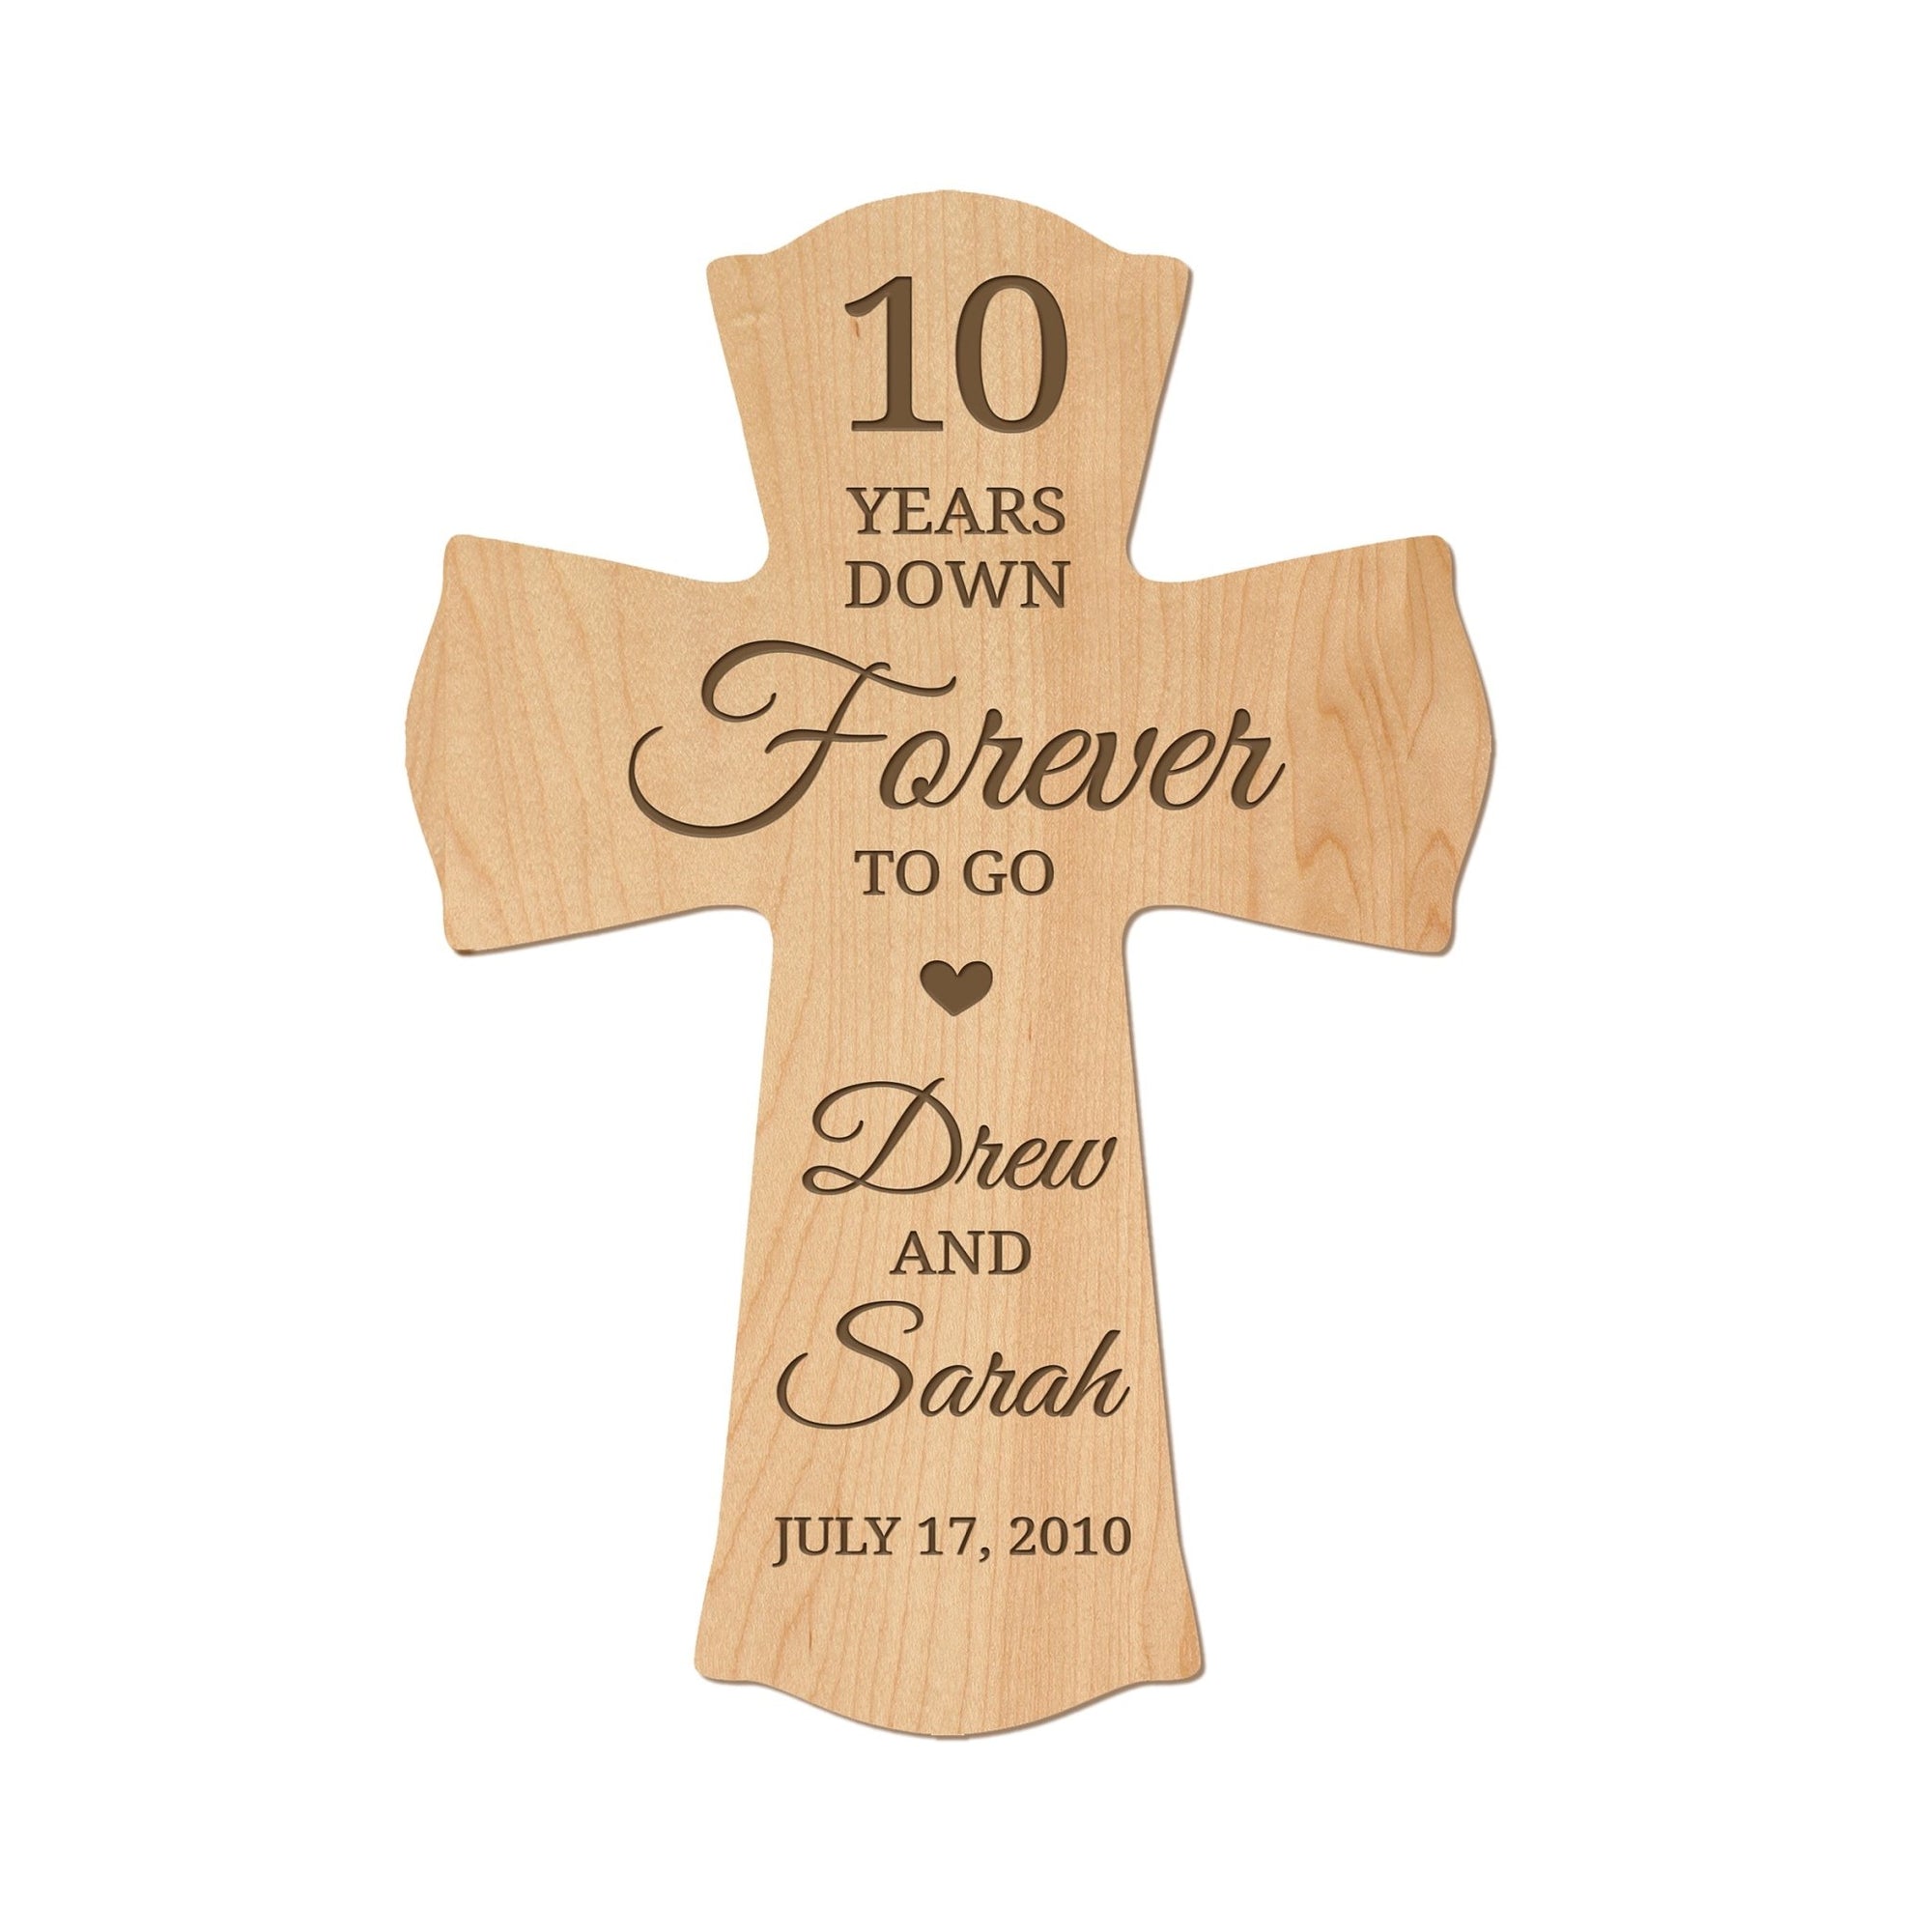 Unique Personalized Gift for 10th Anniversary – Lifesong Milestones Wedding Wall Cross